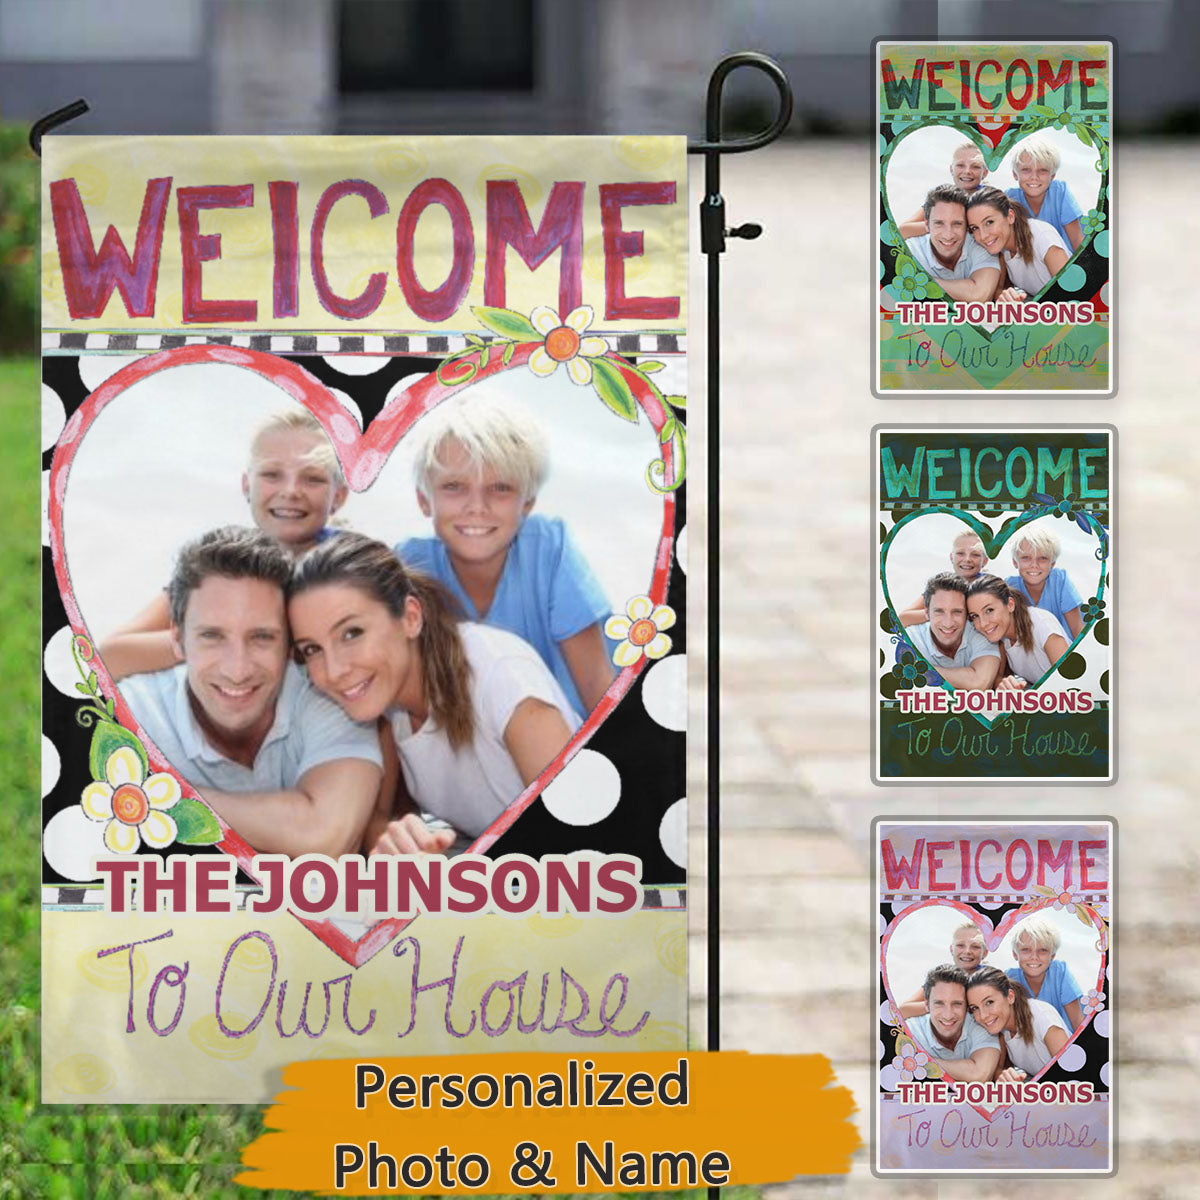 Welcome to Our House – Personalized Photo & Family Name Garden & House Flag